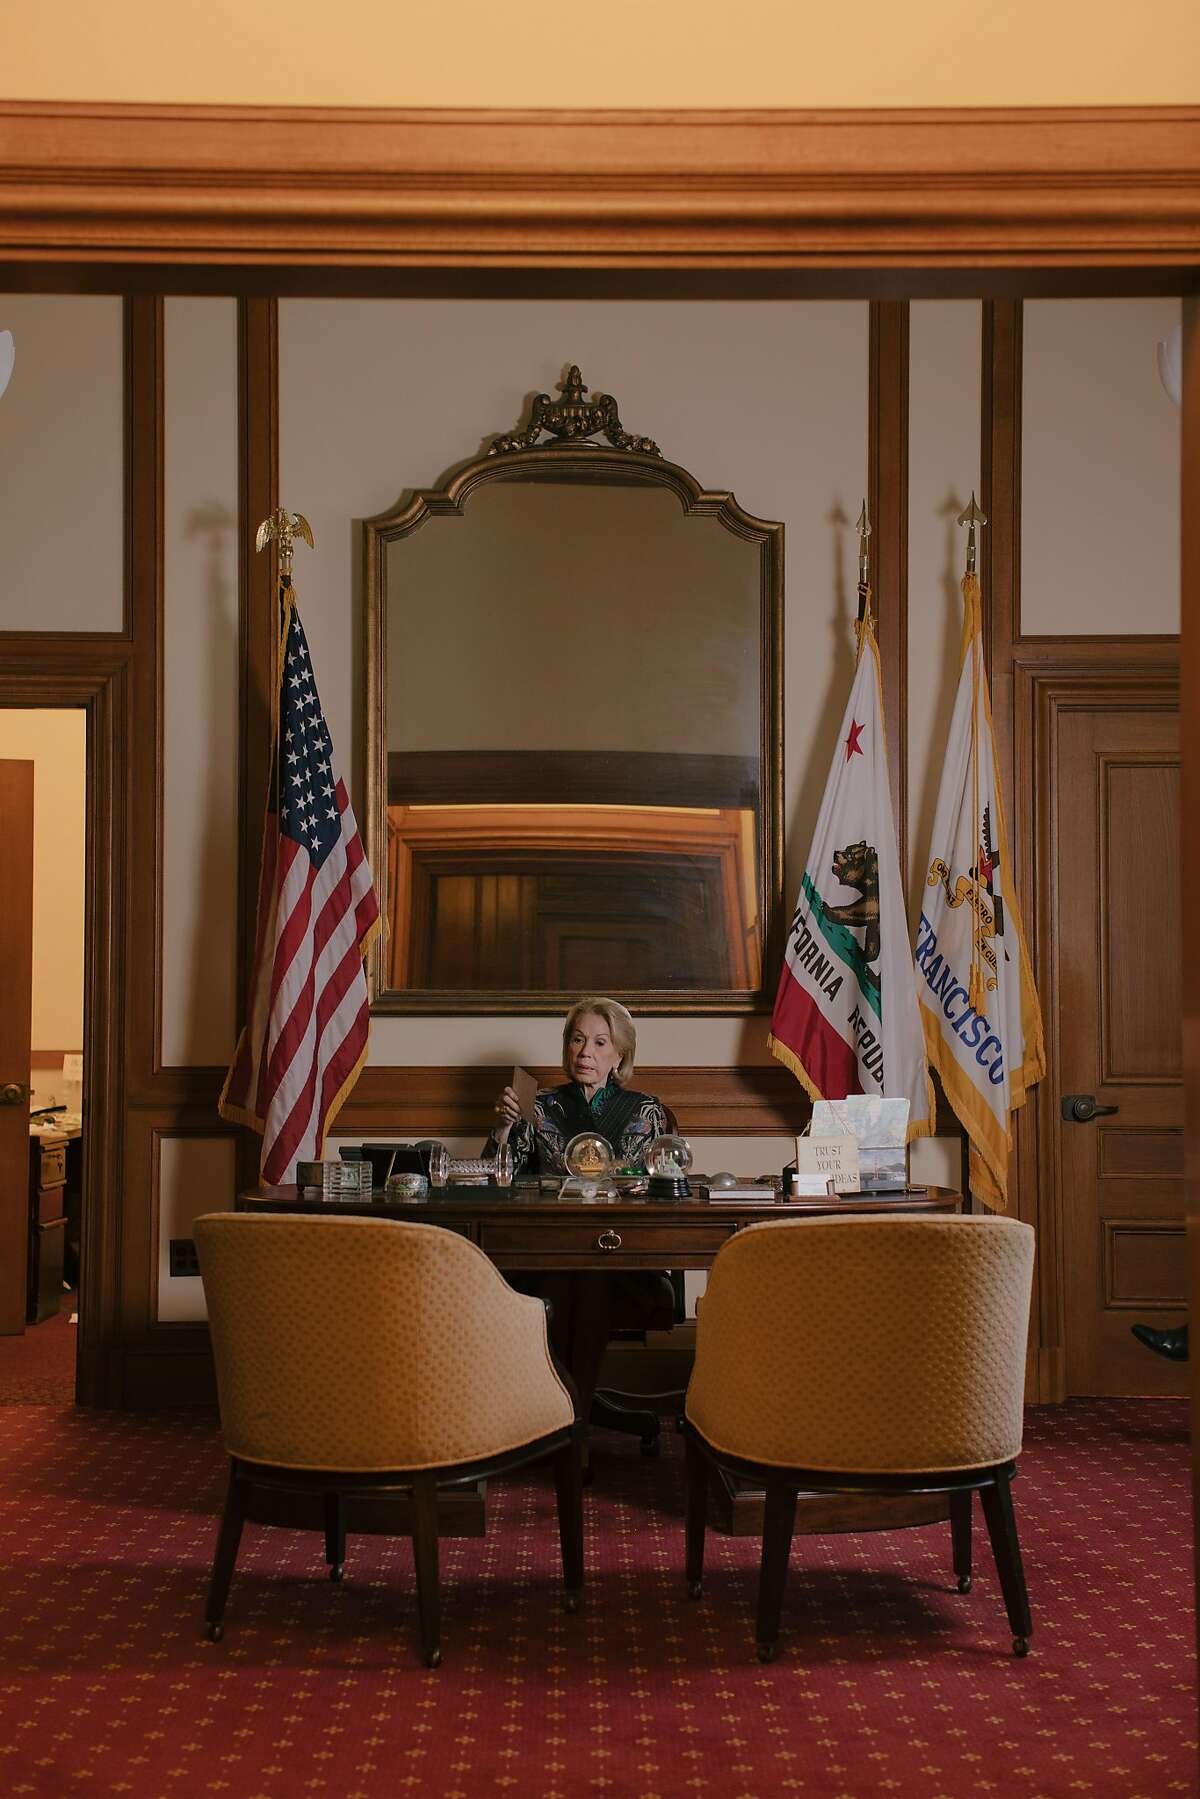 Charlotte Shultz, Chief of Protocol for the City of San Francisco, in her office at City Hall on May 9th, 2018. Shultz has held the position for 55 years, through ten mayors.